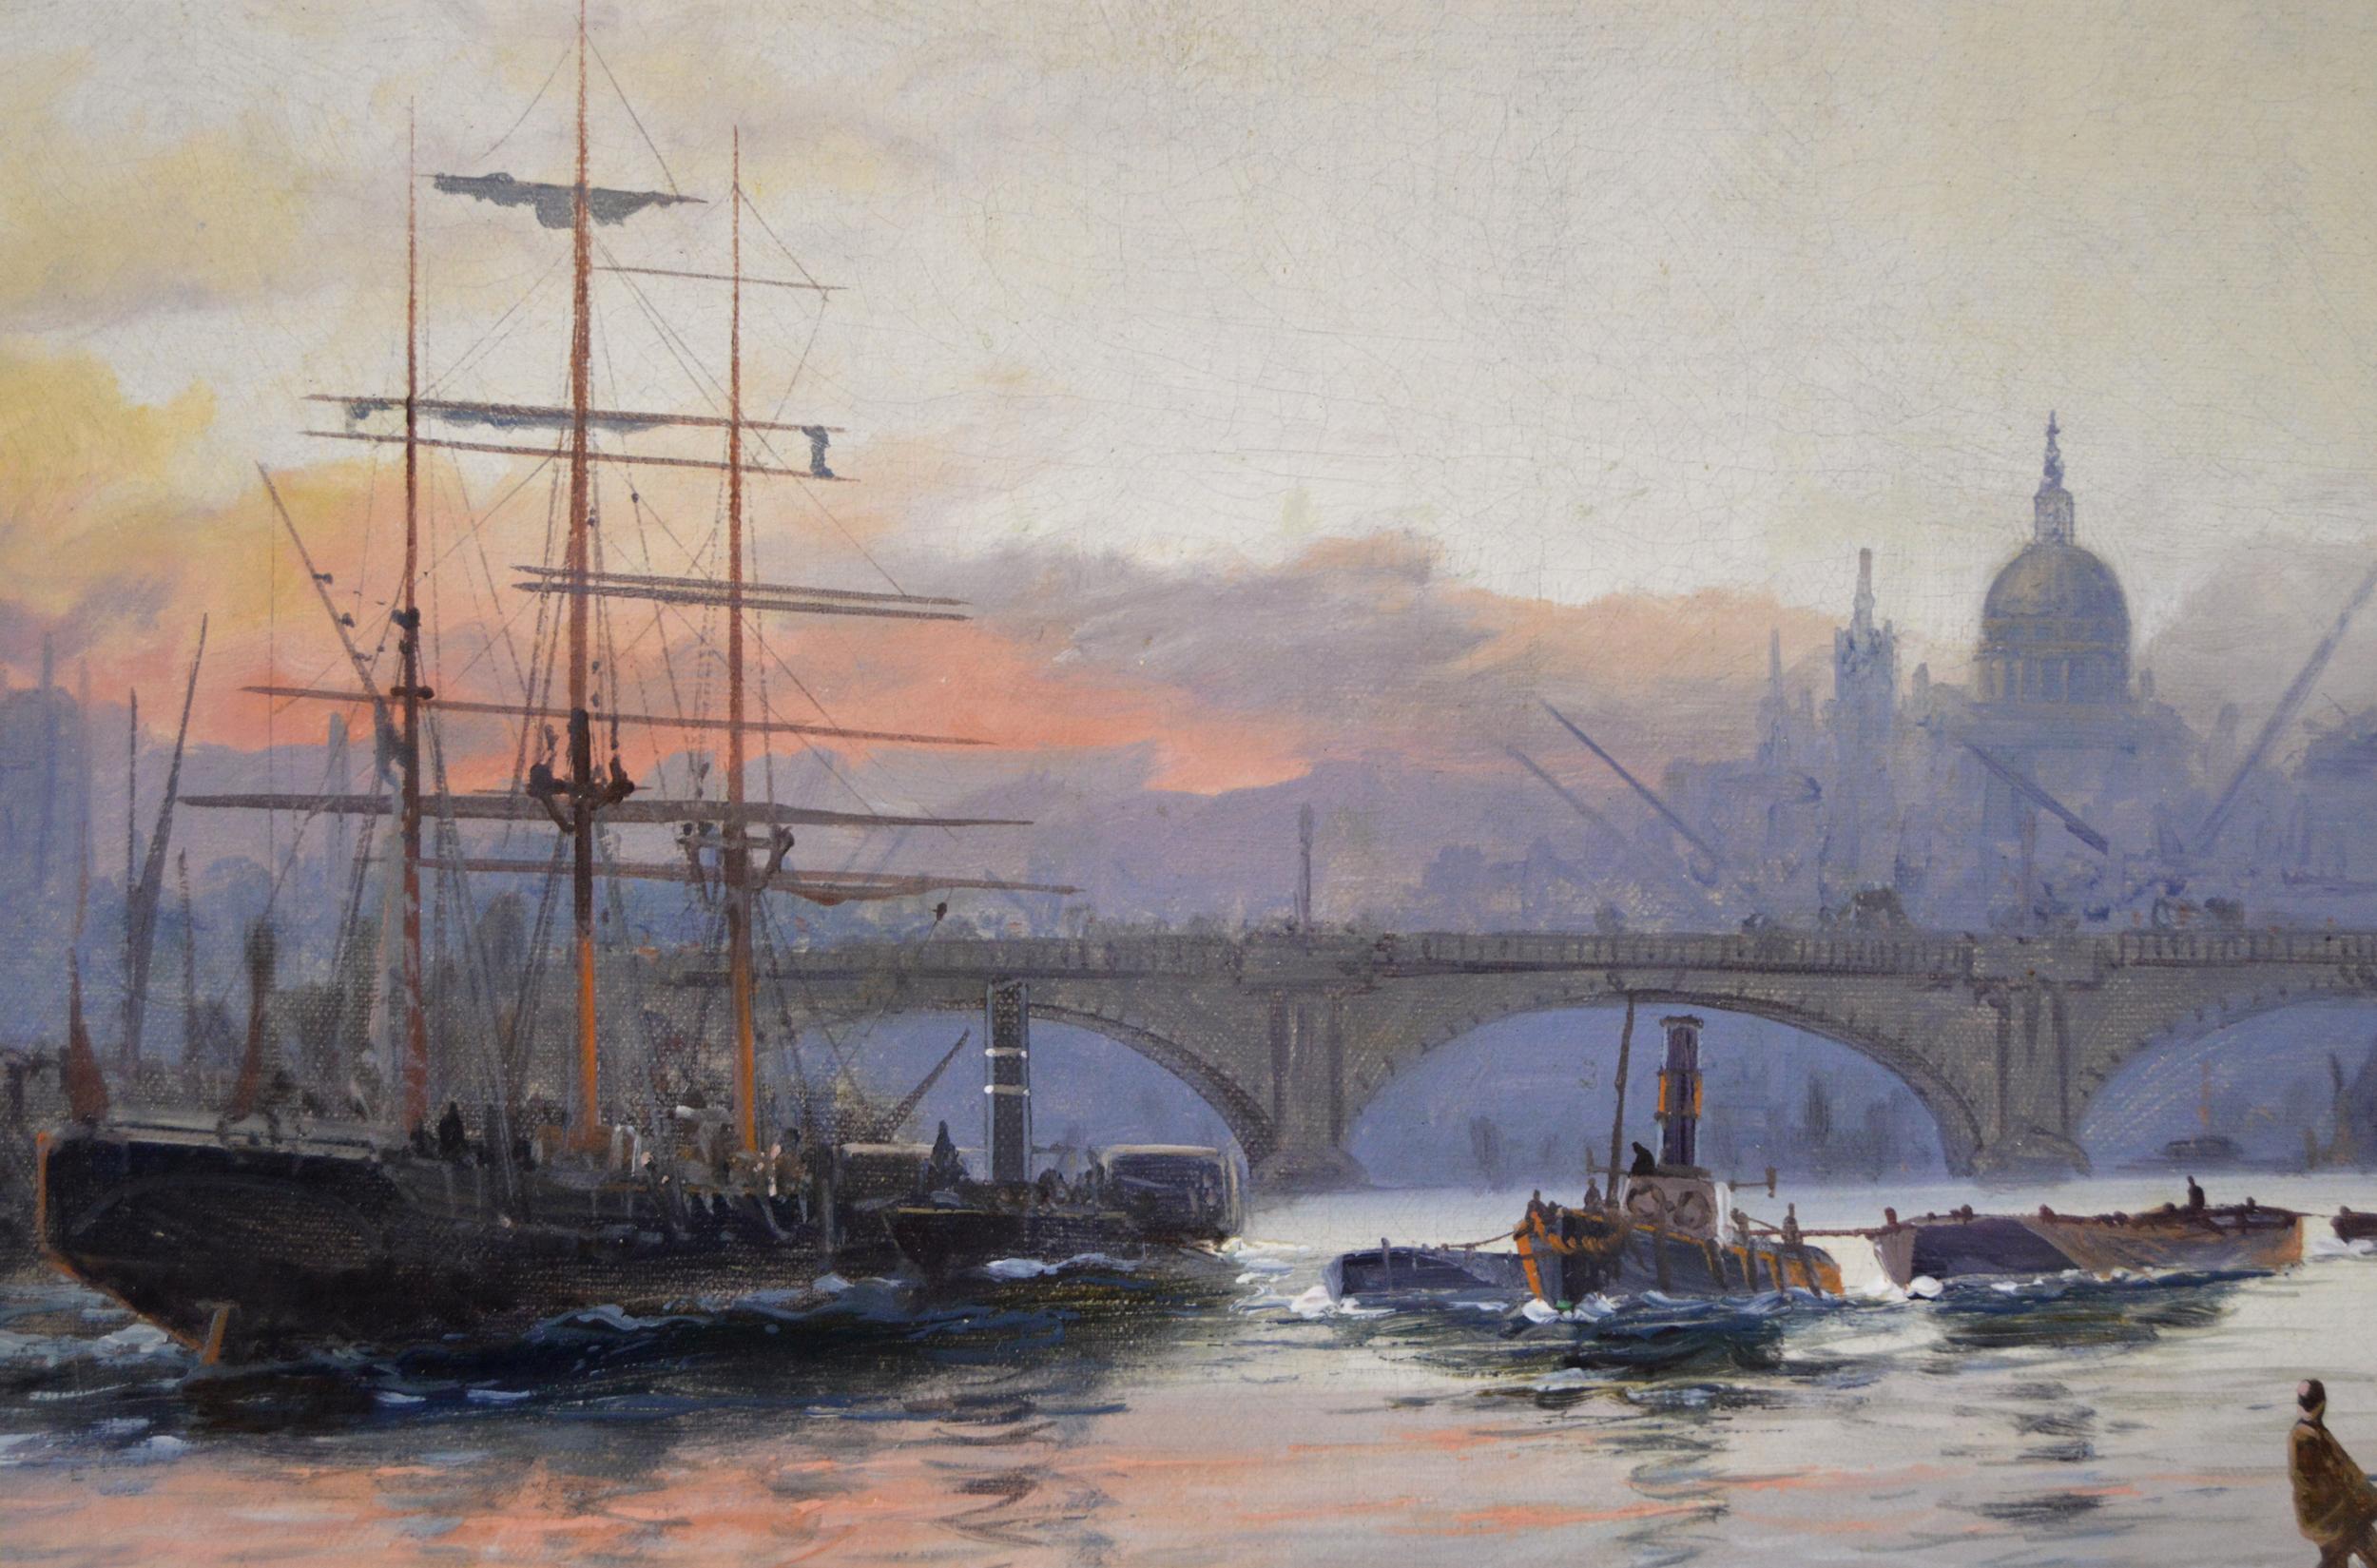 **PLEASE NOTE: EACH PAINTING INCLUDING THE FRAME MEASURES 23.5 INCHES X 31.5 INCHES**

Edward Henry Eugene Fletcher
British, (1857-1945)
Shipping on the Thames before Westminster & Shipping in the Pool of London with London Bridge & St Paul’s